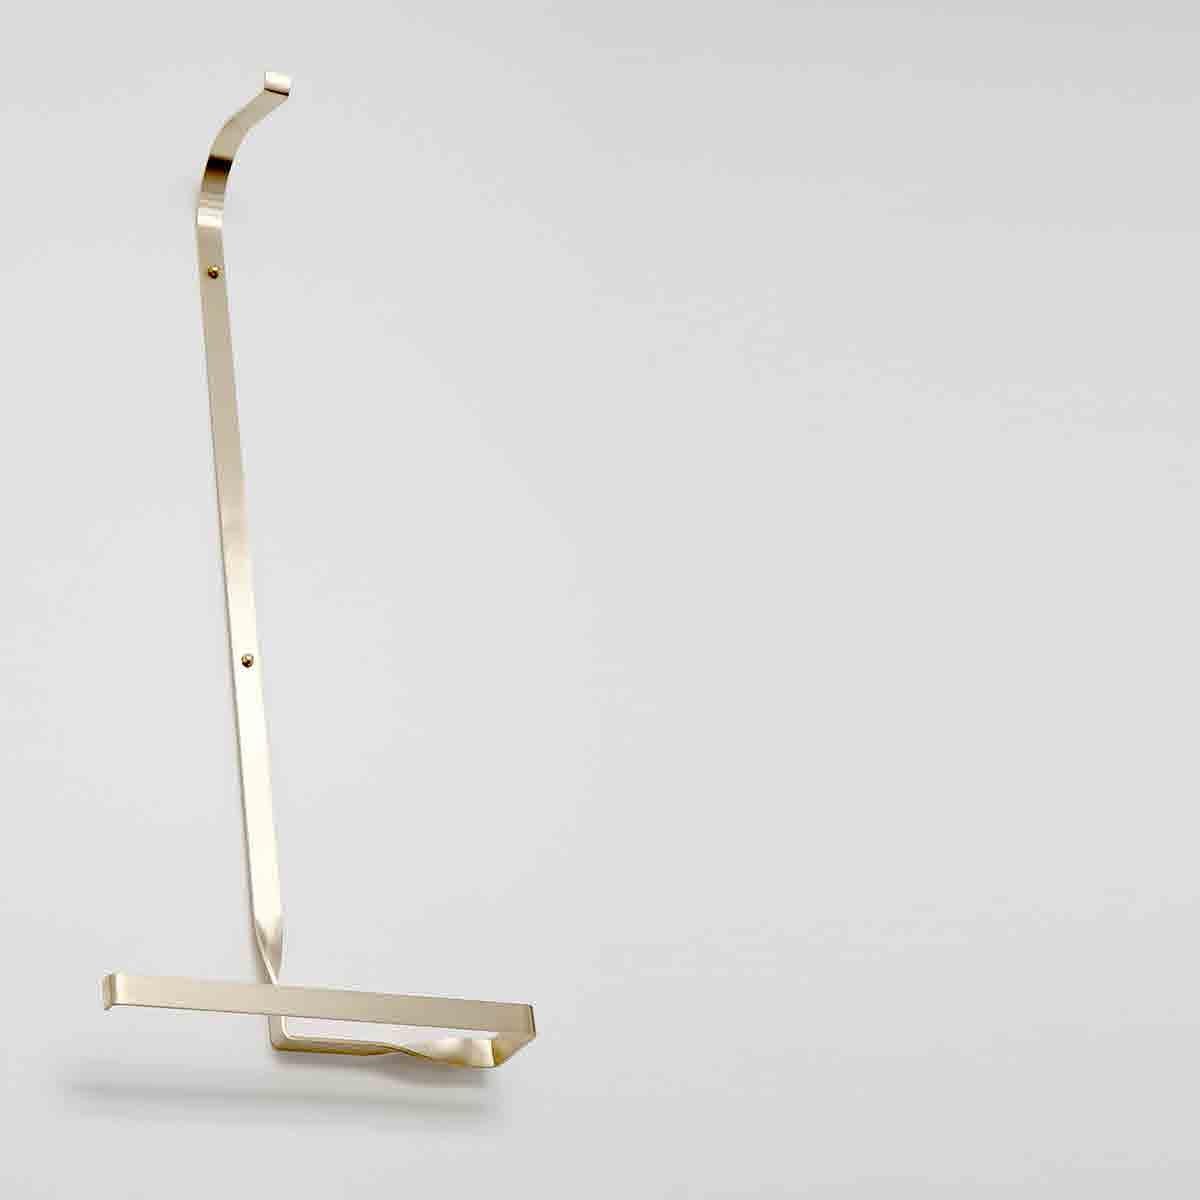 Valet stand from the Cintes Collection by Josep Abril

Galant appears as a flying ribbon drawing in the air the form of a valet stand, in an instant, it is frozen into a brass bar. This is the first piece of the collection of valet stands named